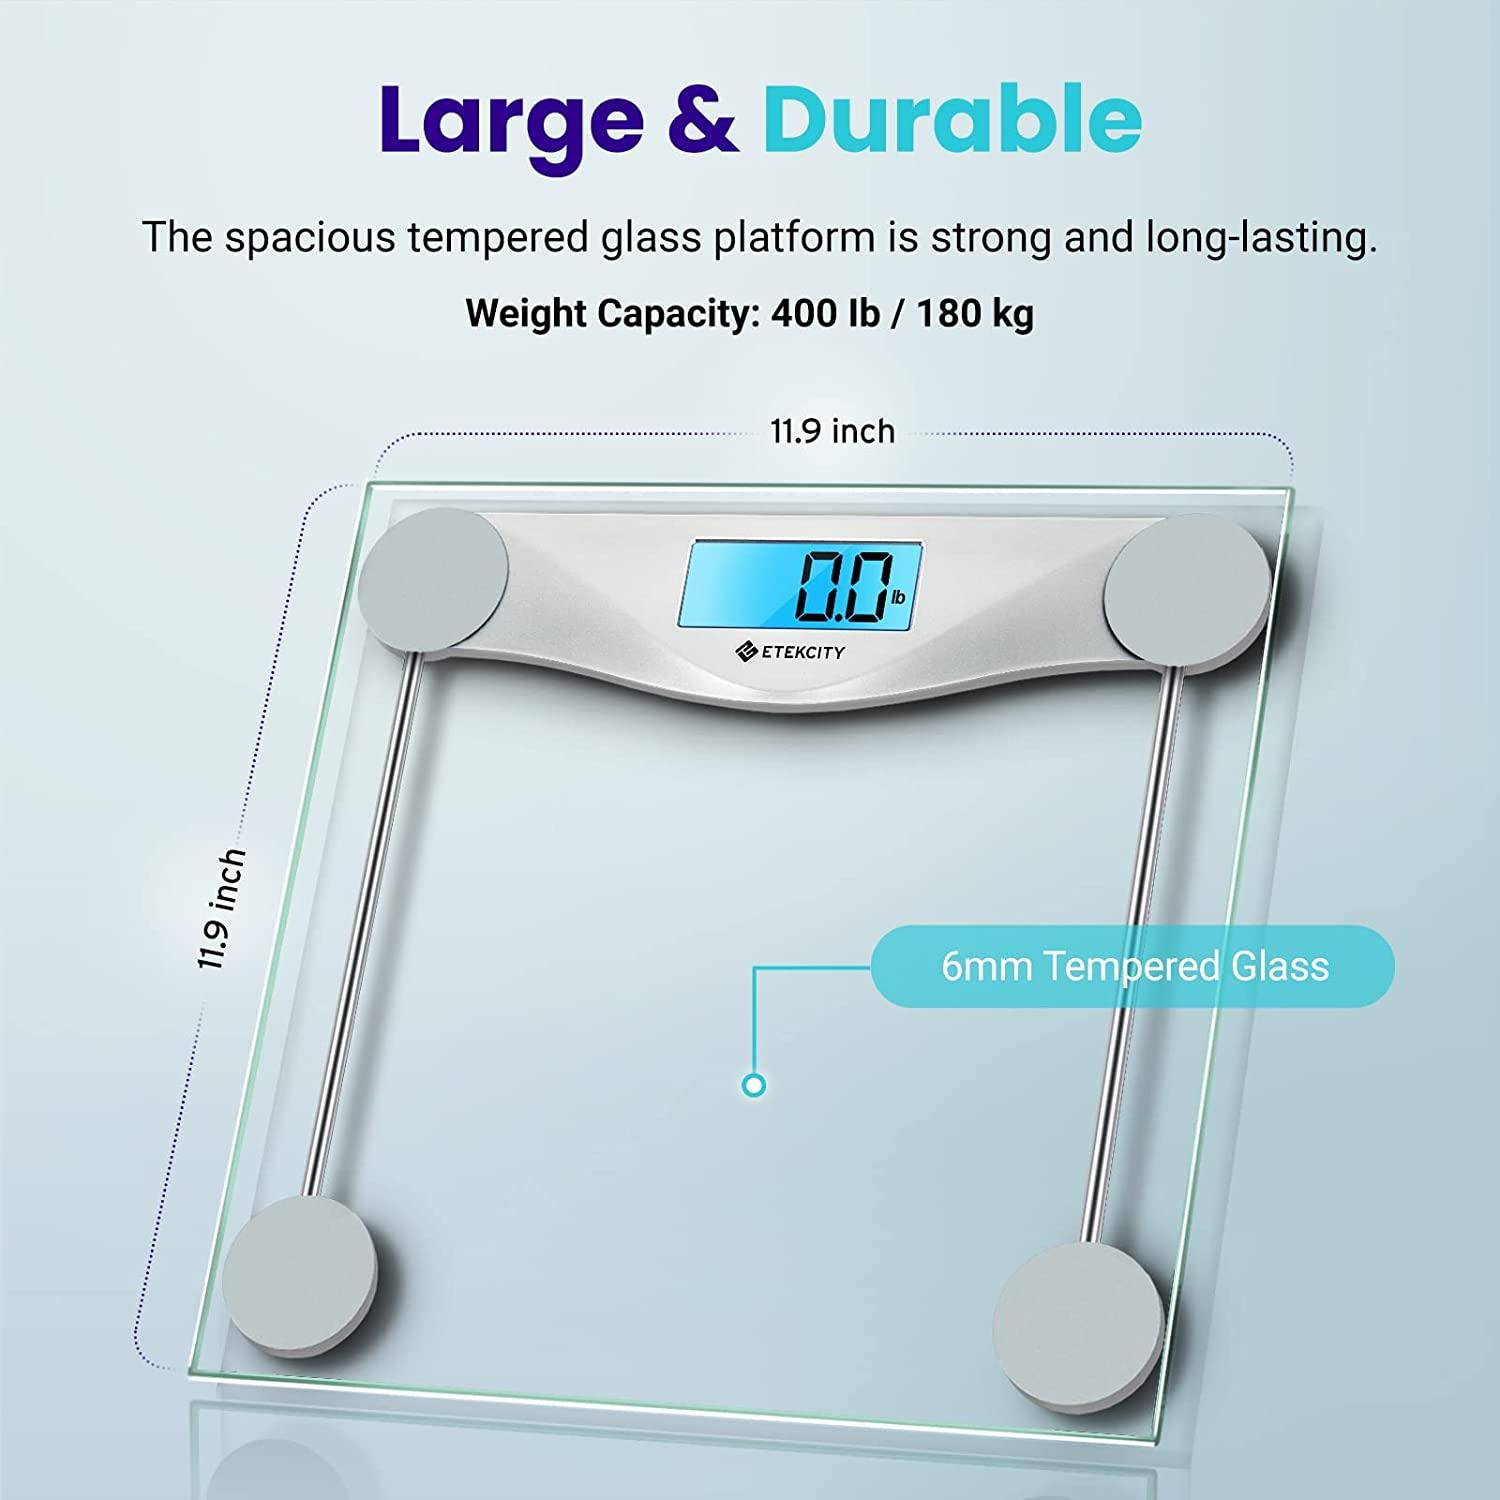 Large Display Talking Weight Scale